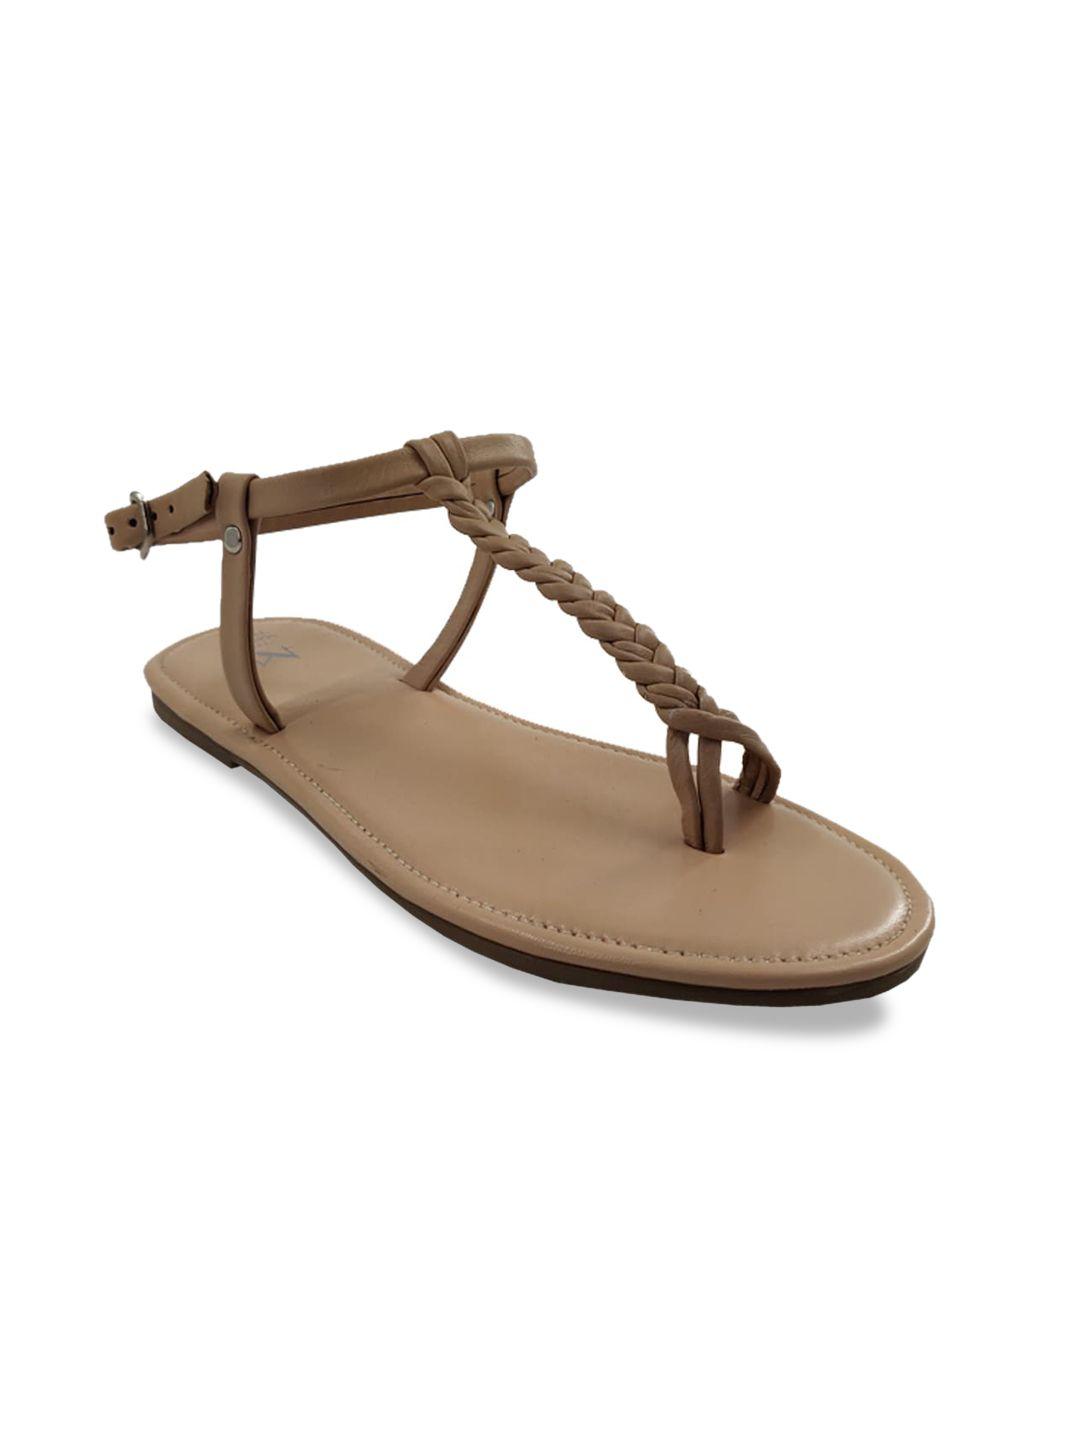 the madras trunk women beige solid leather open toe flats